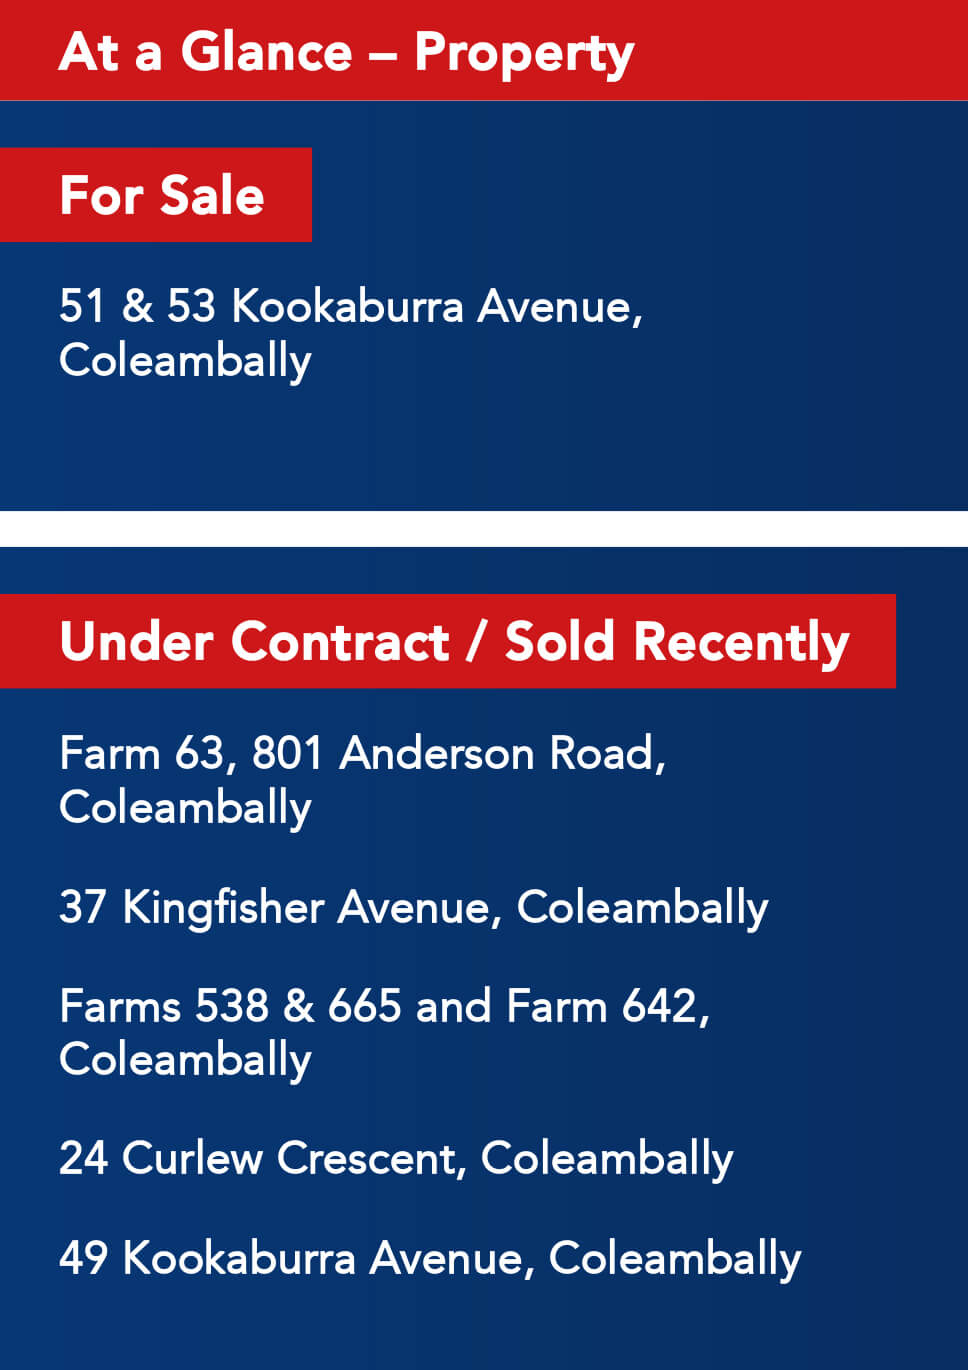 Property Update information at a glance